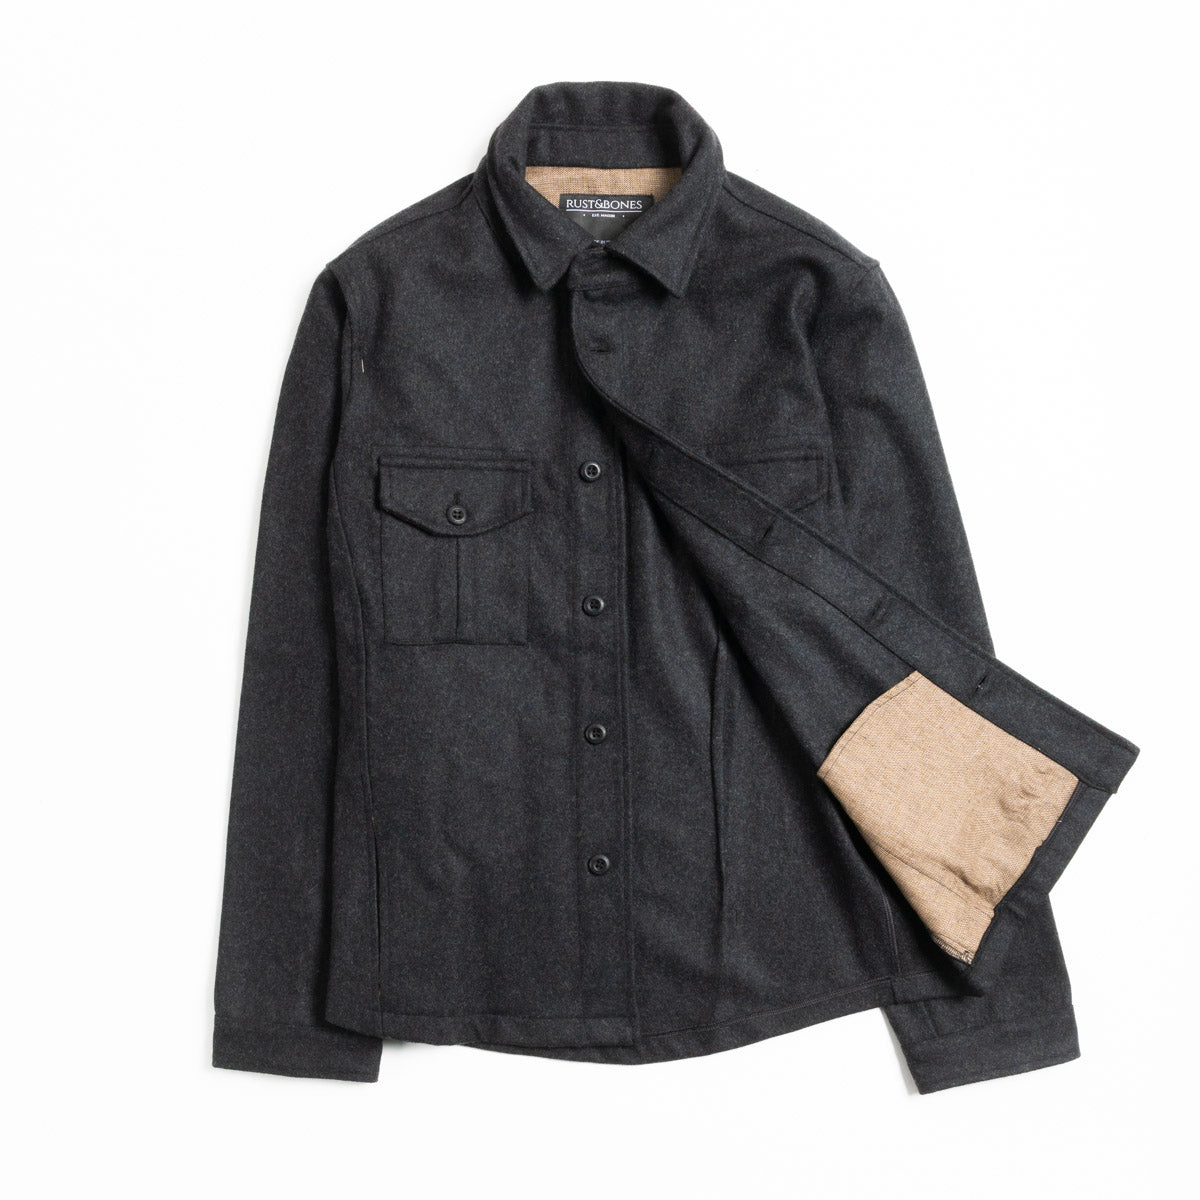 Wool overshirt made in Italy by rust&bones